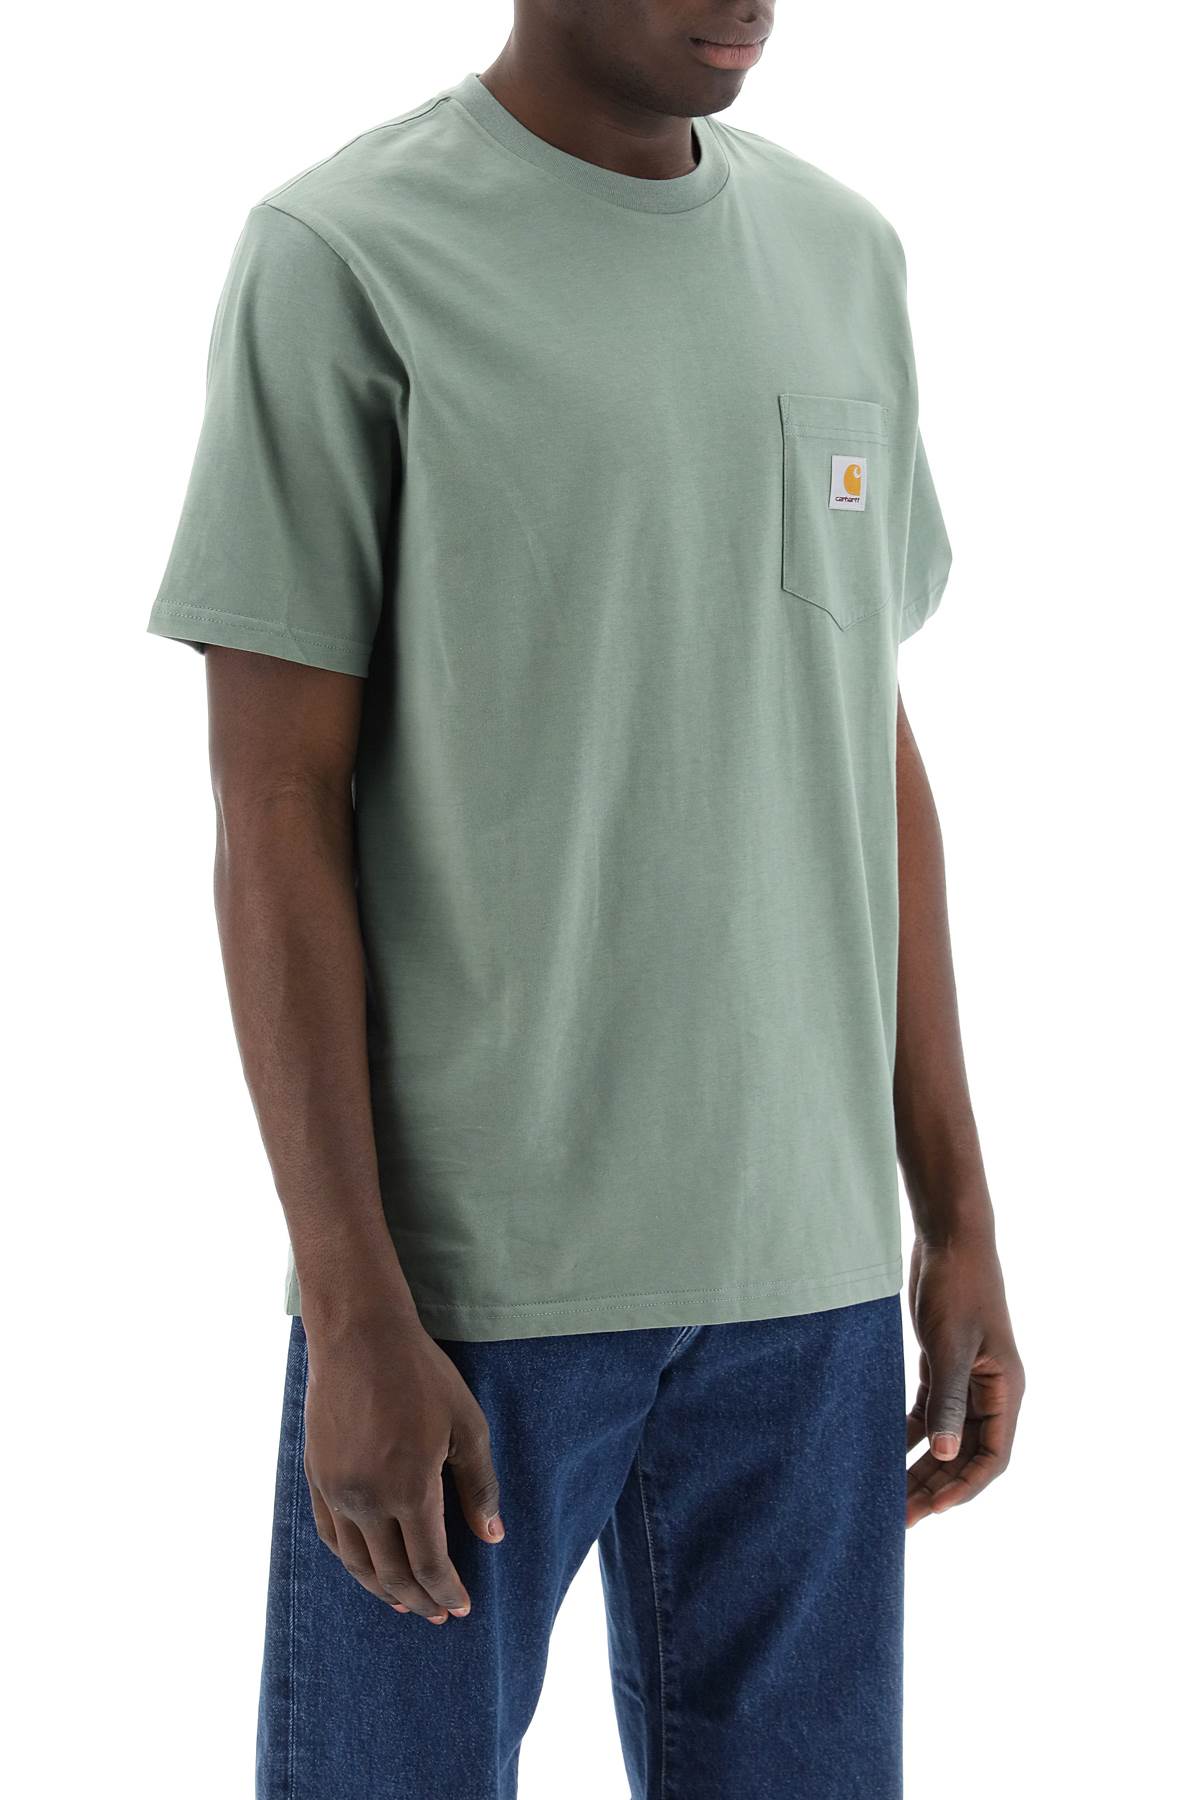 Carhartt wip t-shirt with chest pocket-1